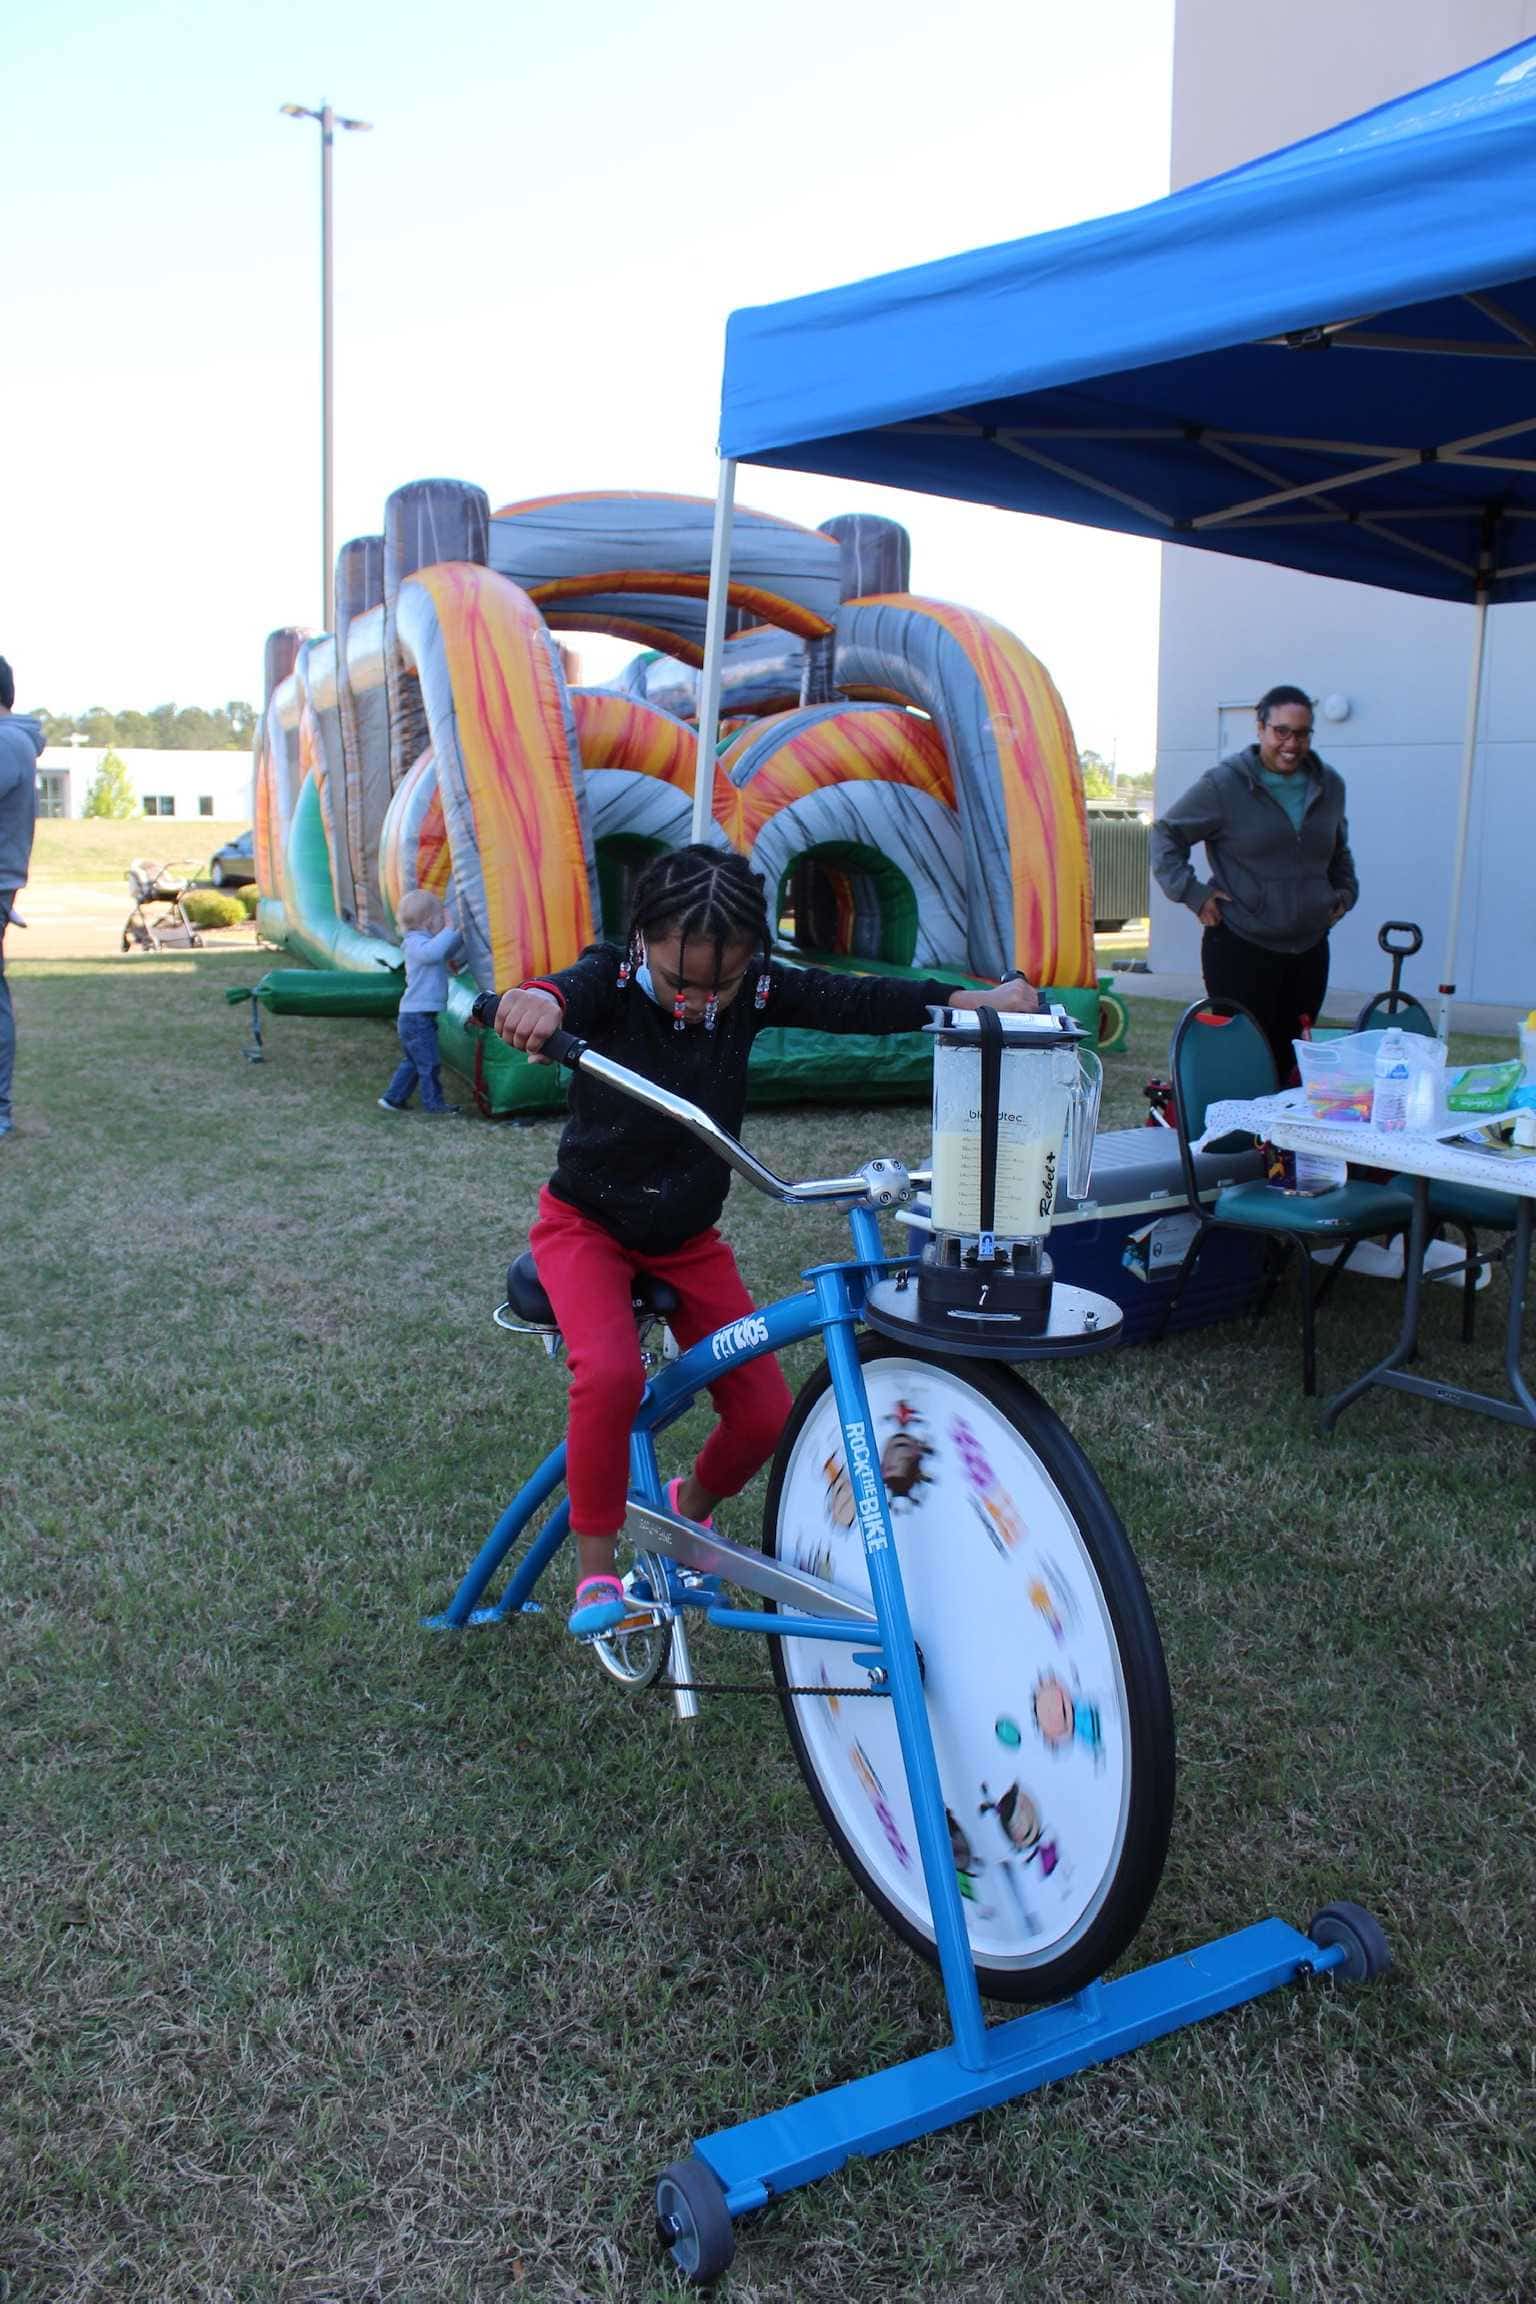 Child riding a stationary bike with a large front wheel.